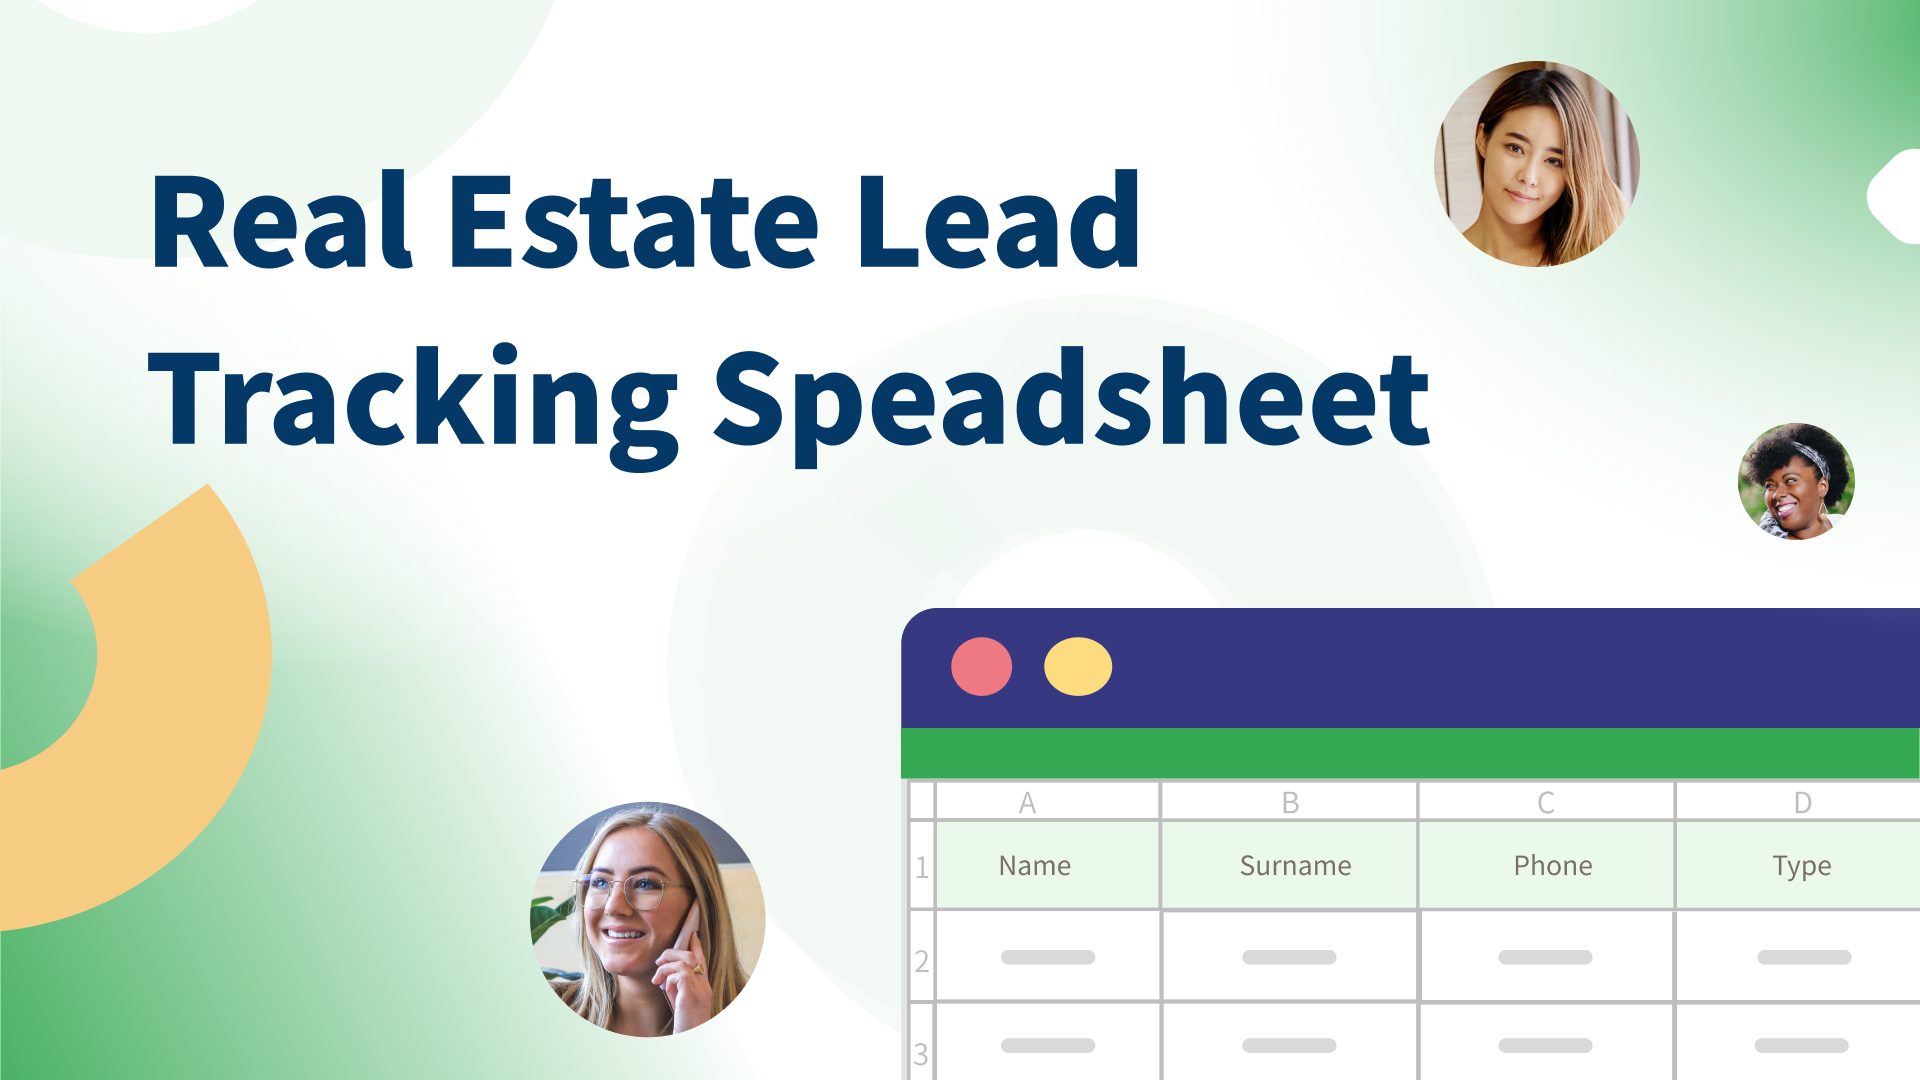 Real Estate Lead Tracking Spreadsheet: Guide to Organizing Leads & Tracking Metrics